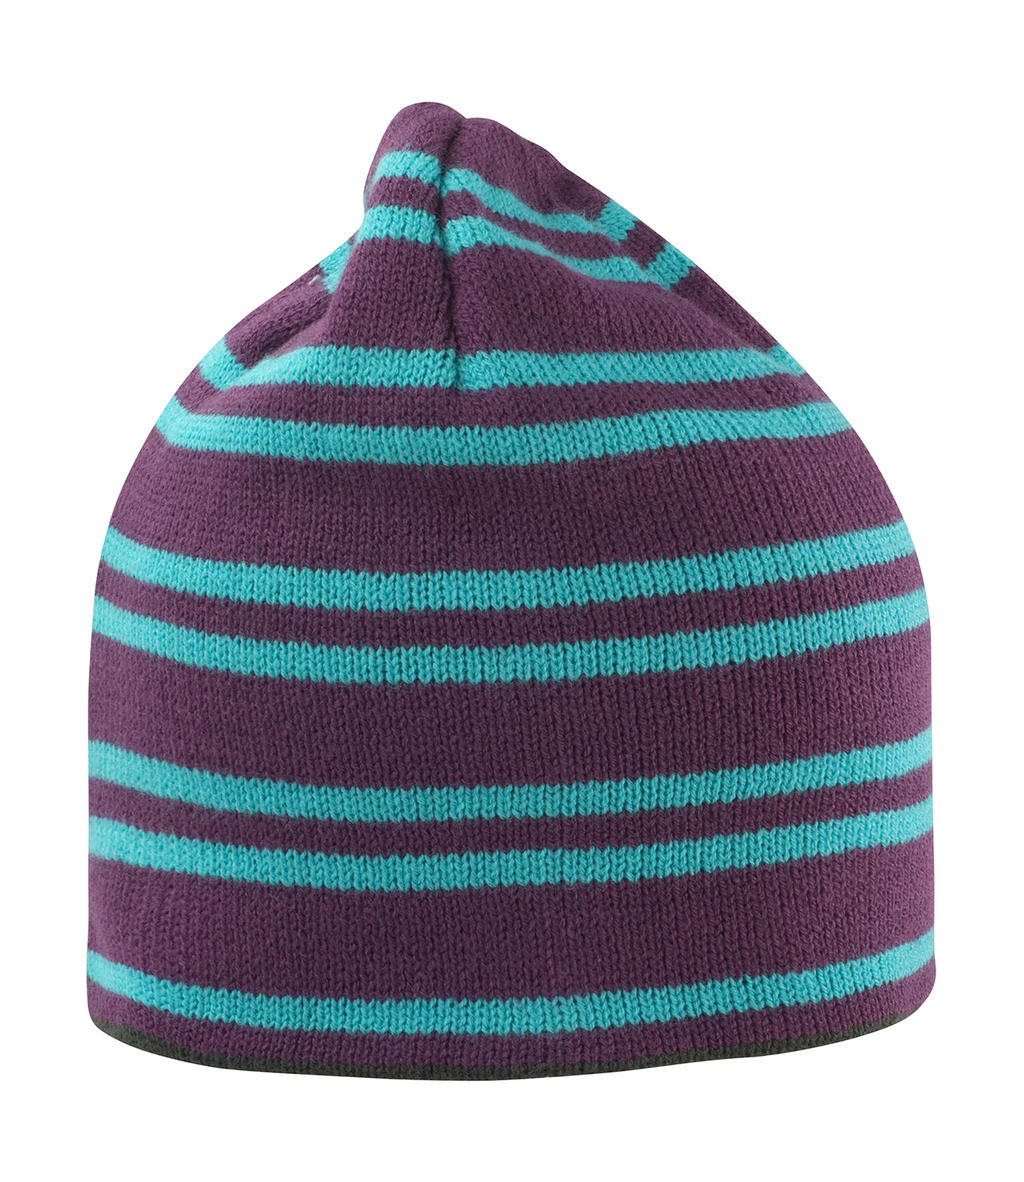  Team Reversible Beanie in Farbe Plum/Turquoise/Grey